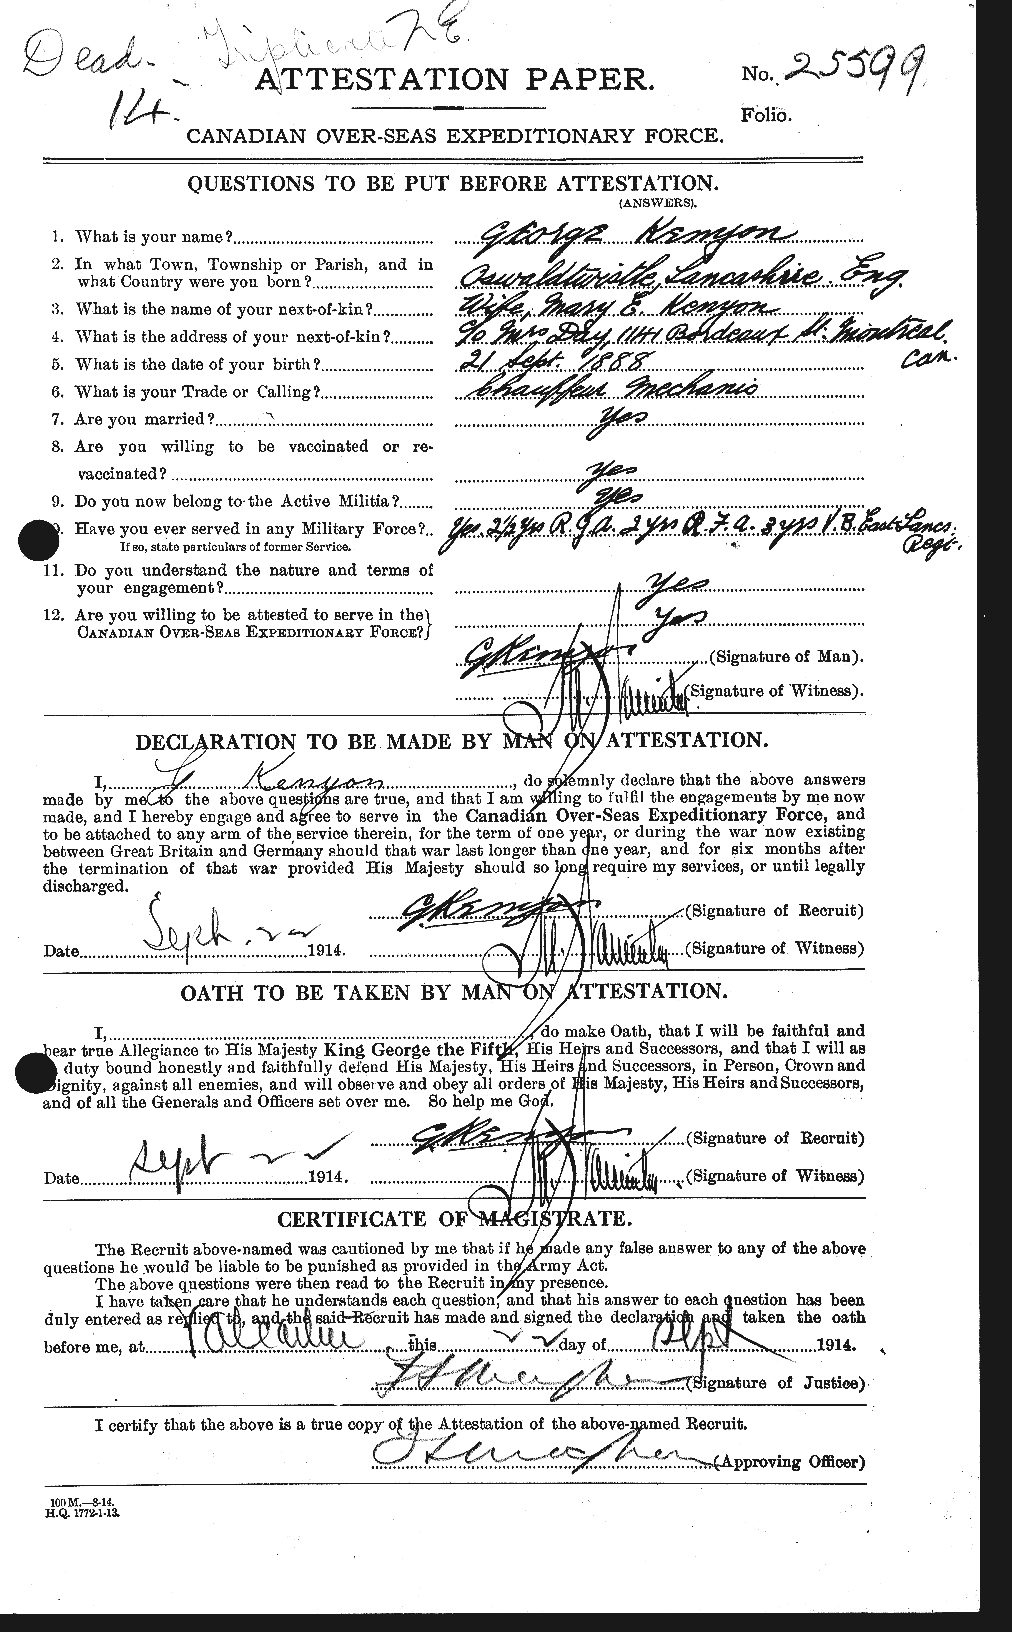 Personnel Records of the First World War - CEF 430450a